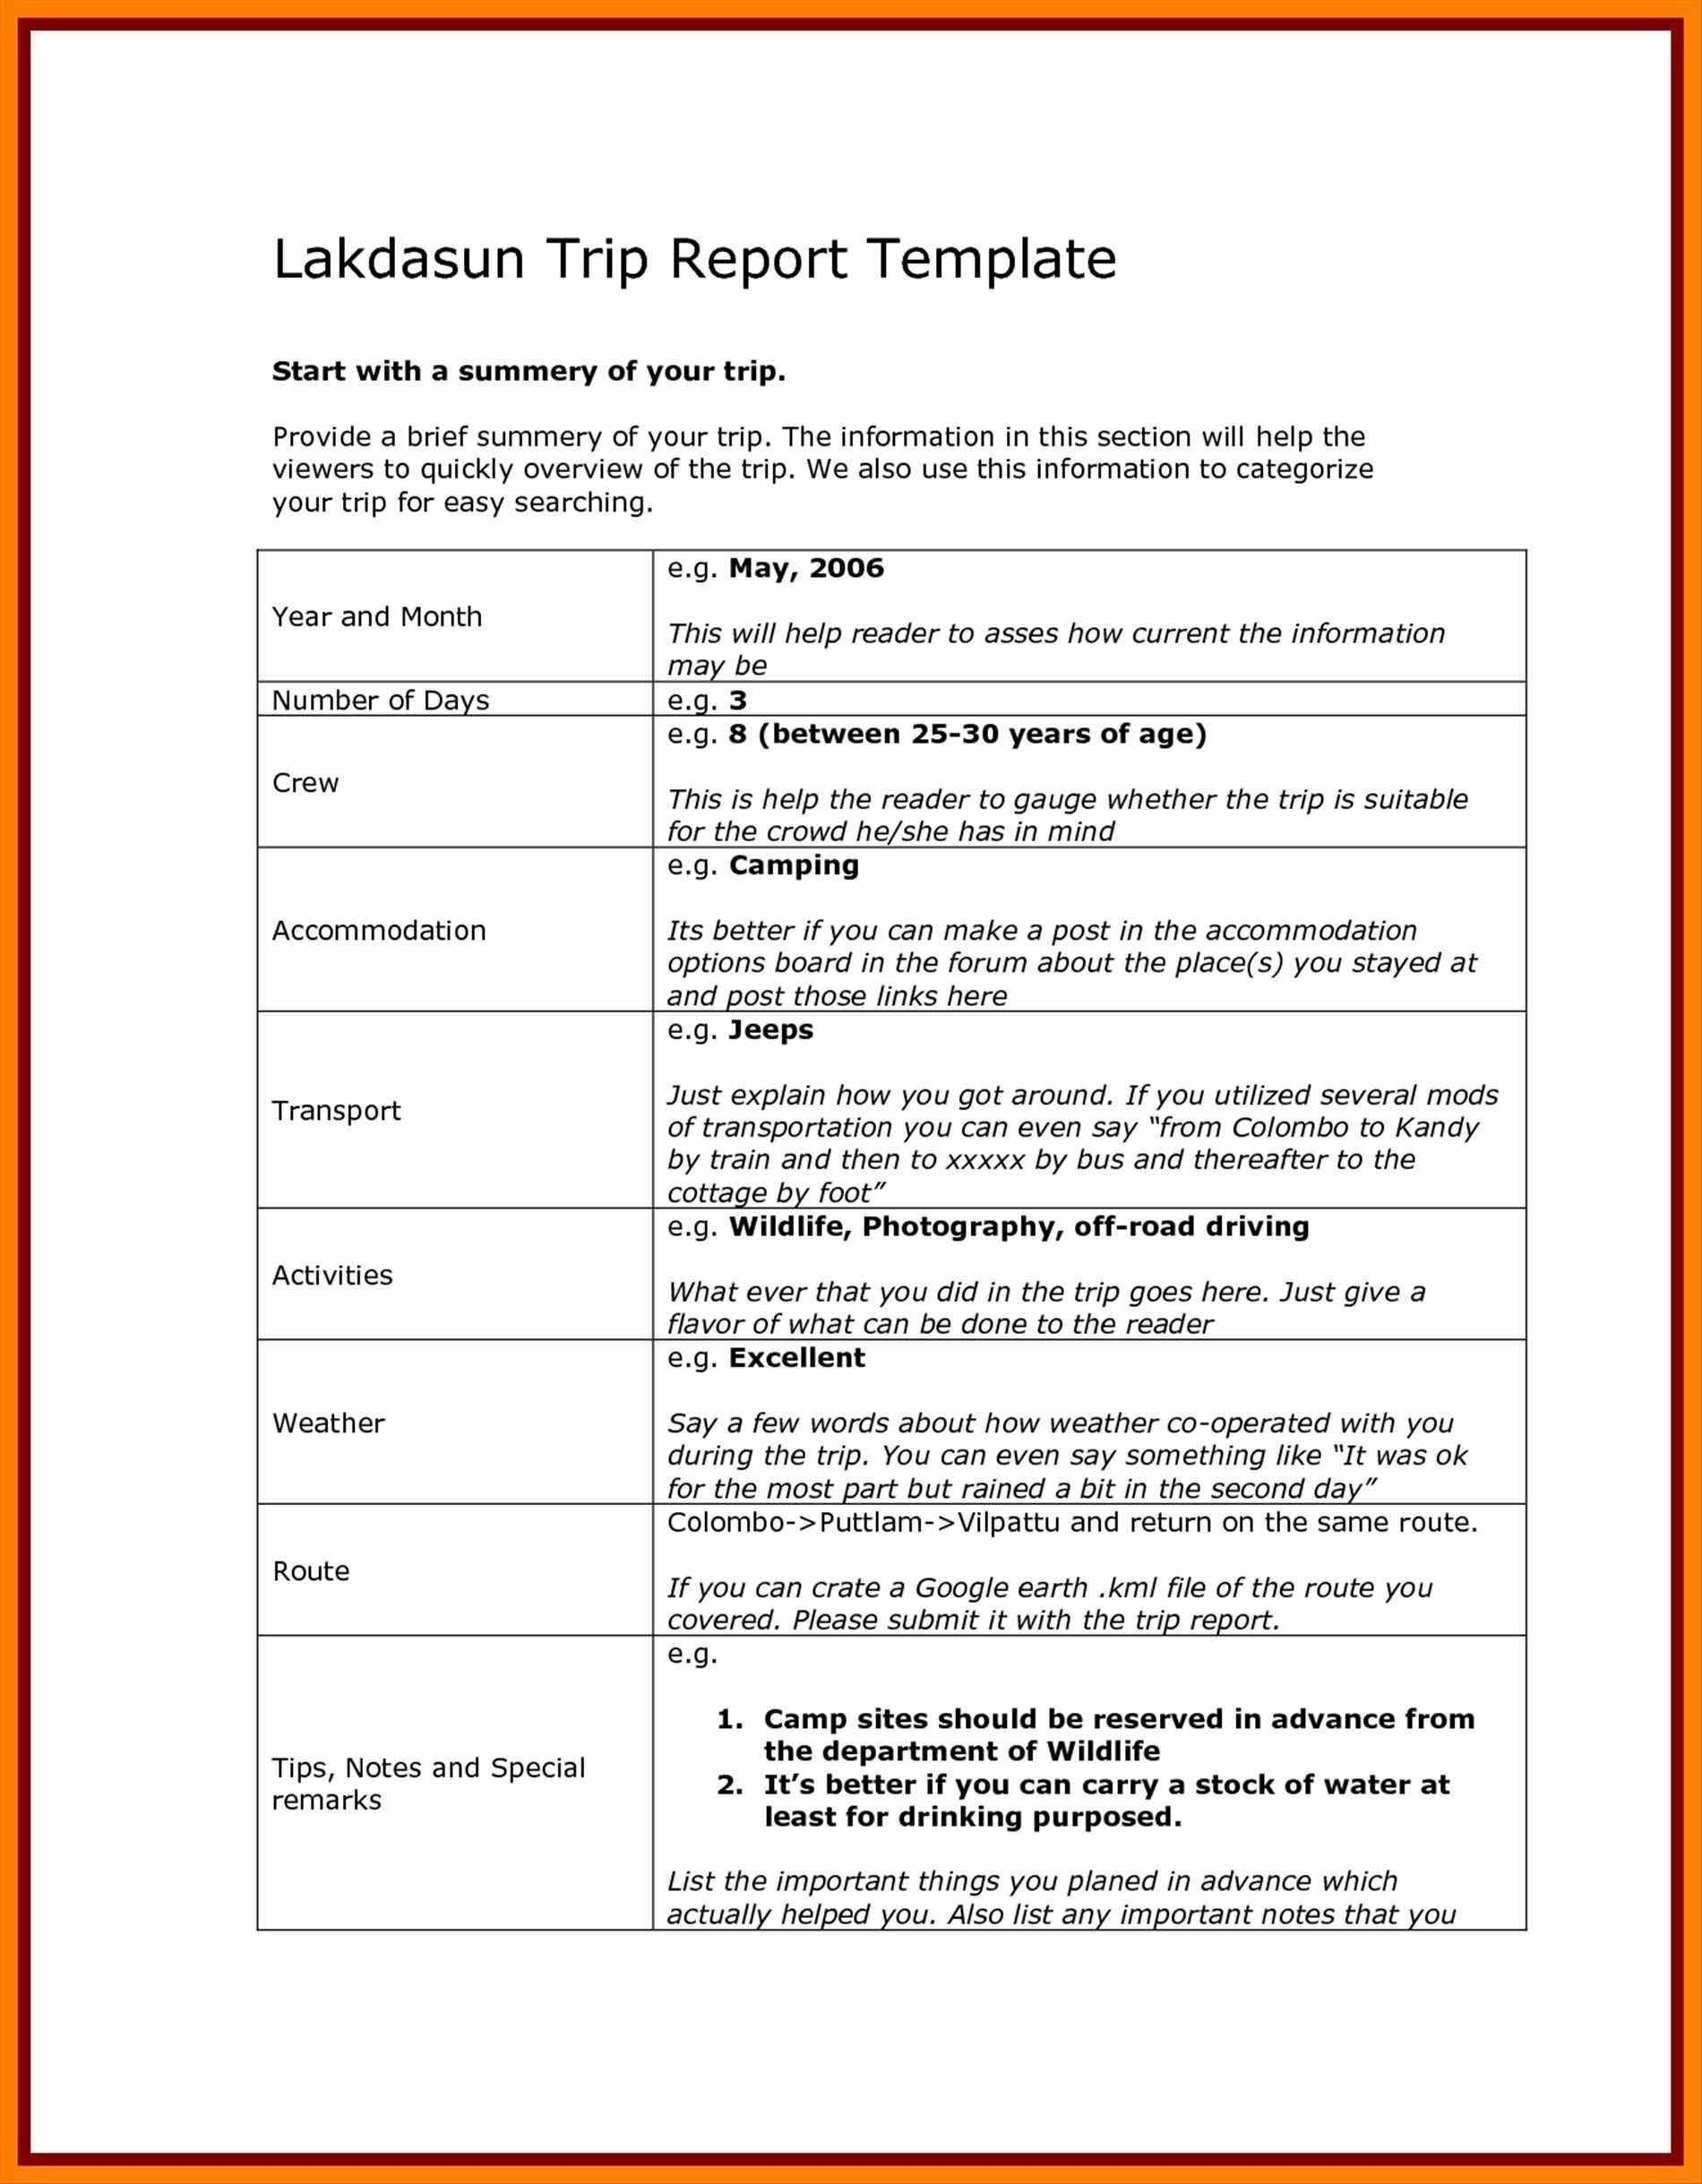 Download New Business Trip Report Template Word Can Save At With Regard To Business Trip Report Template